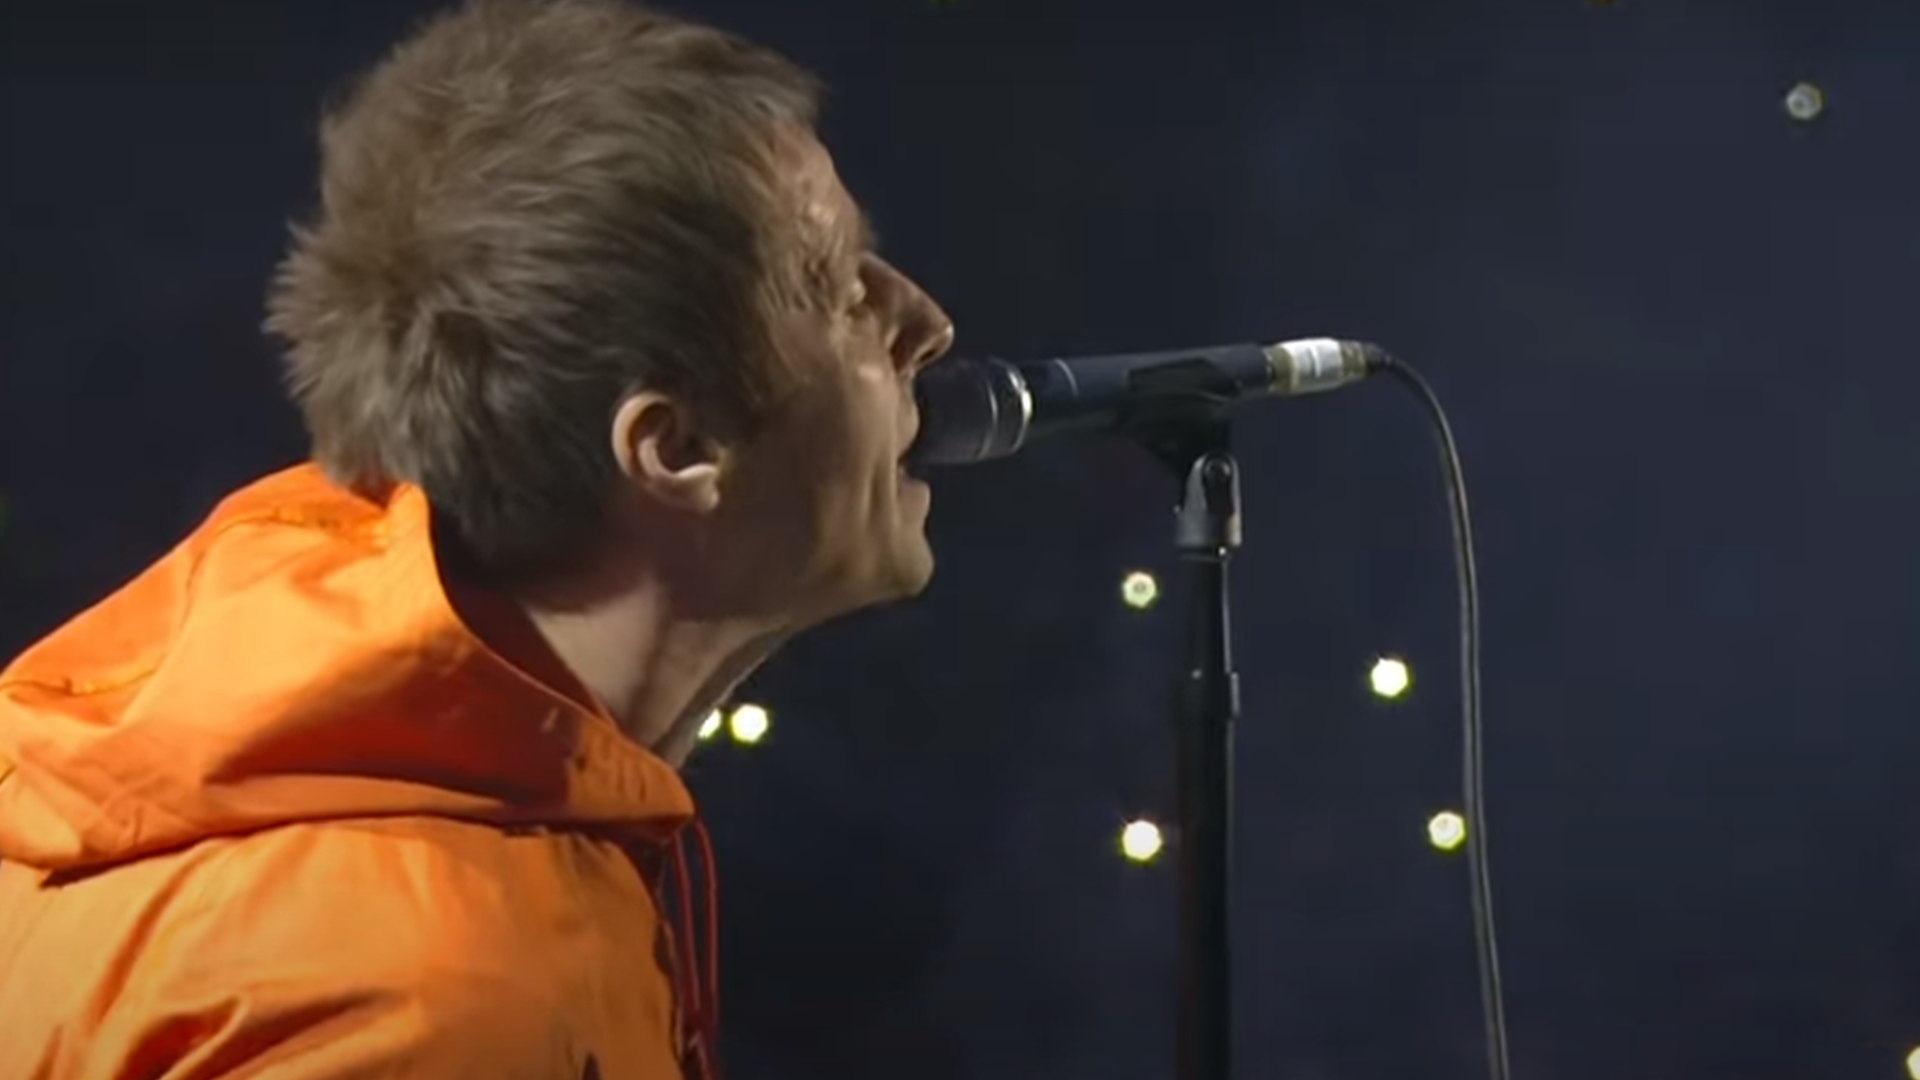 Liam Gallagher singing on stage